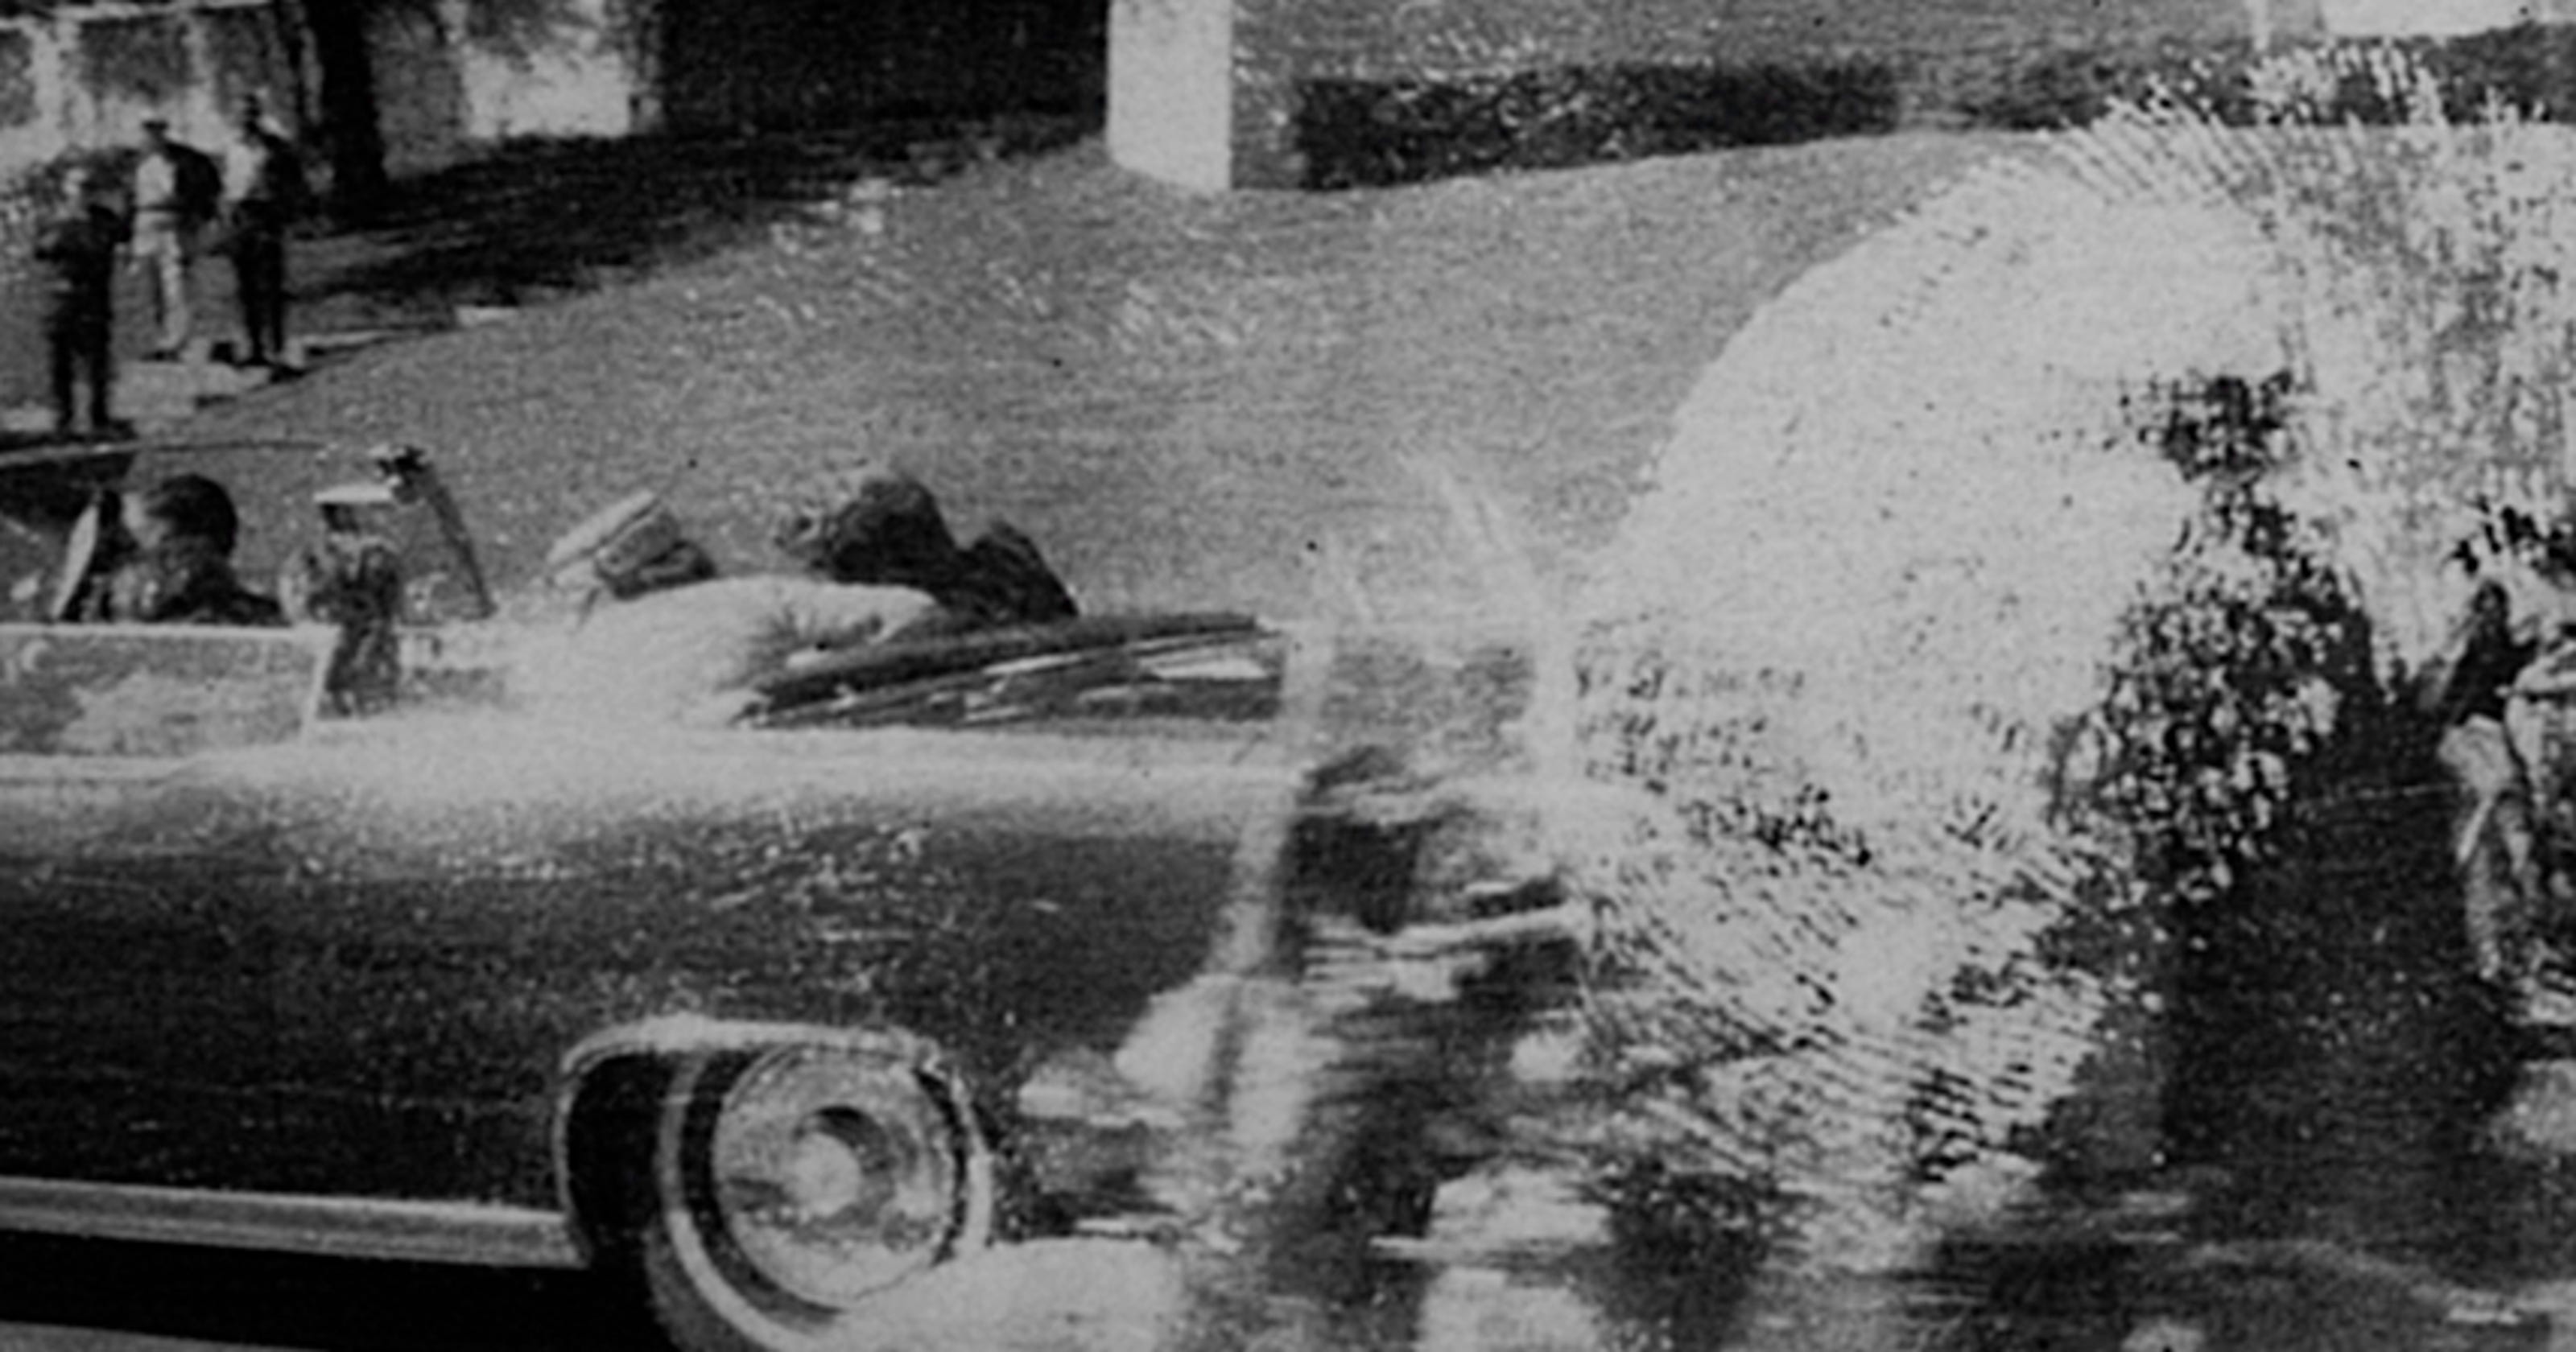 Historic Kennedy Assassination Photo To Be Auctioned 